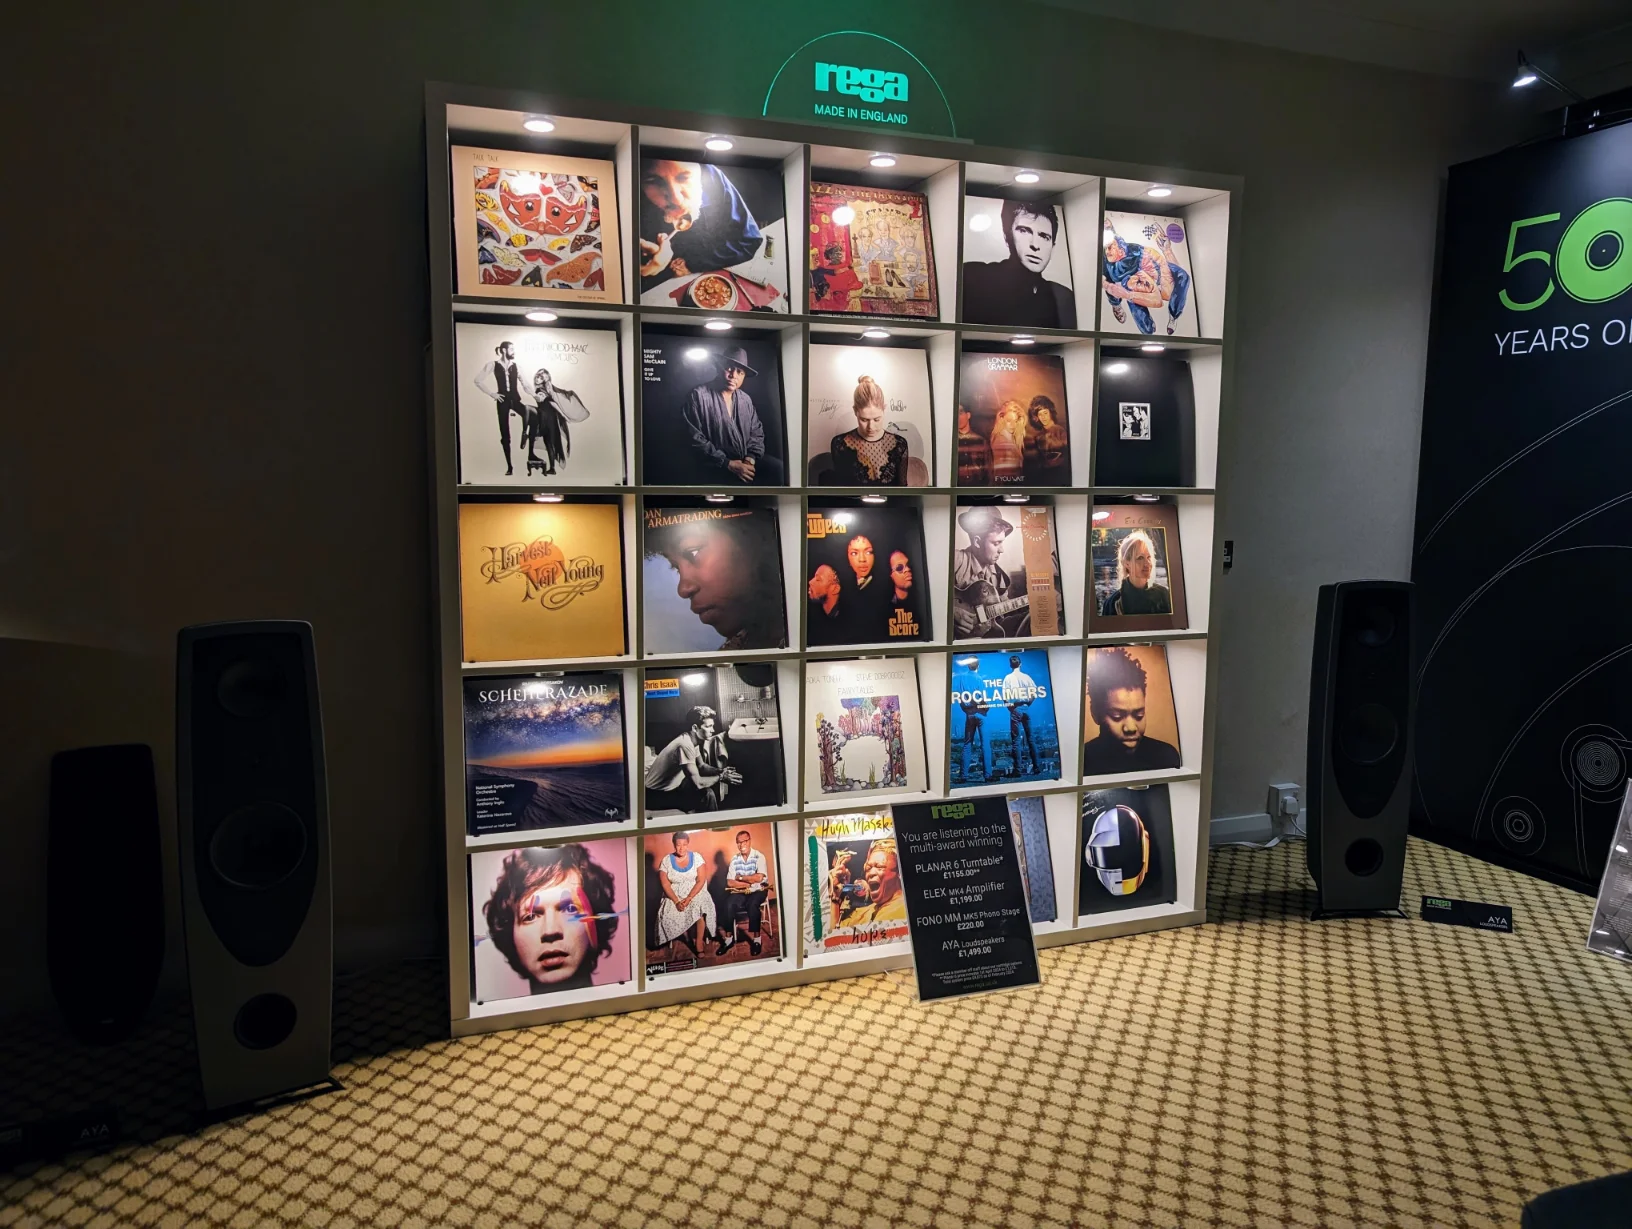 A great display of records. I tried to show the speakers but my skills with a camera let me down. I actually quite like the end result – arty!